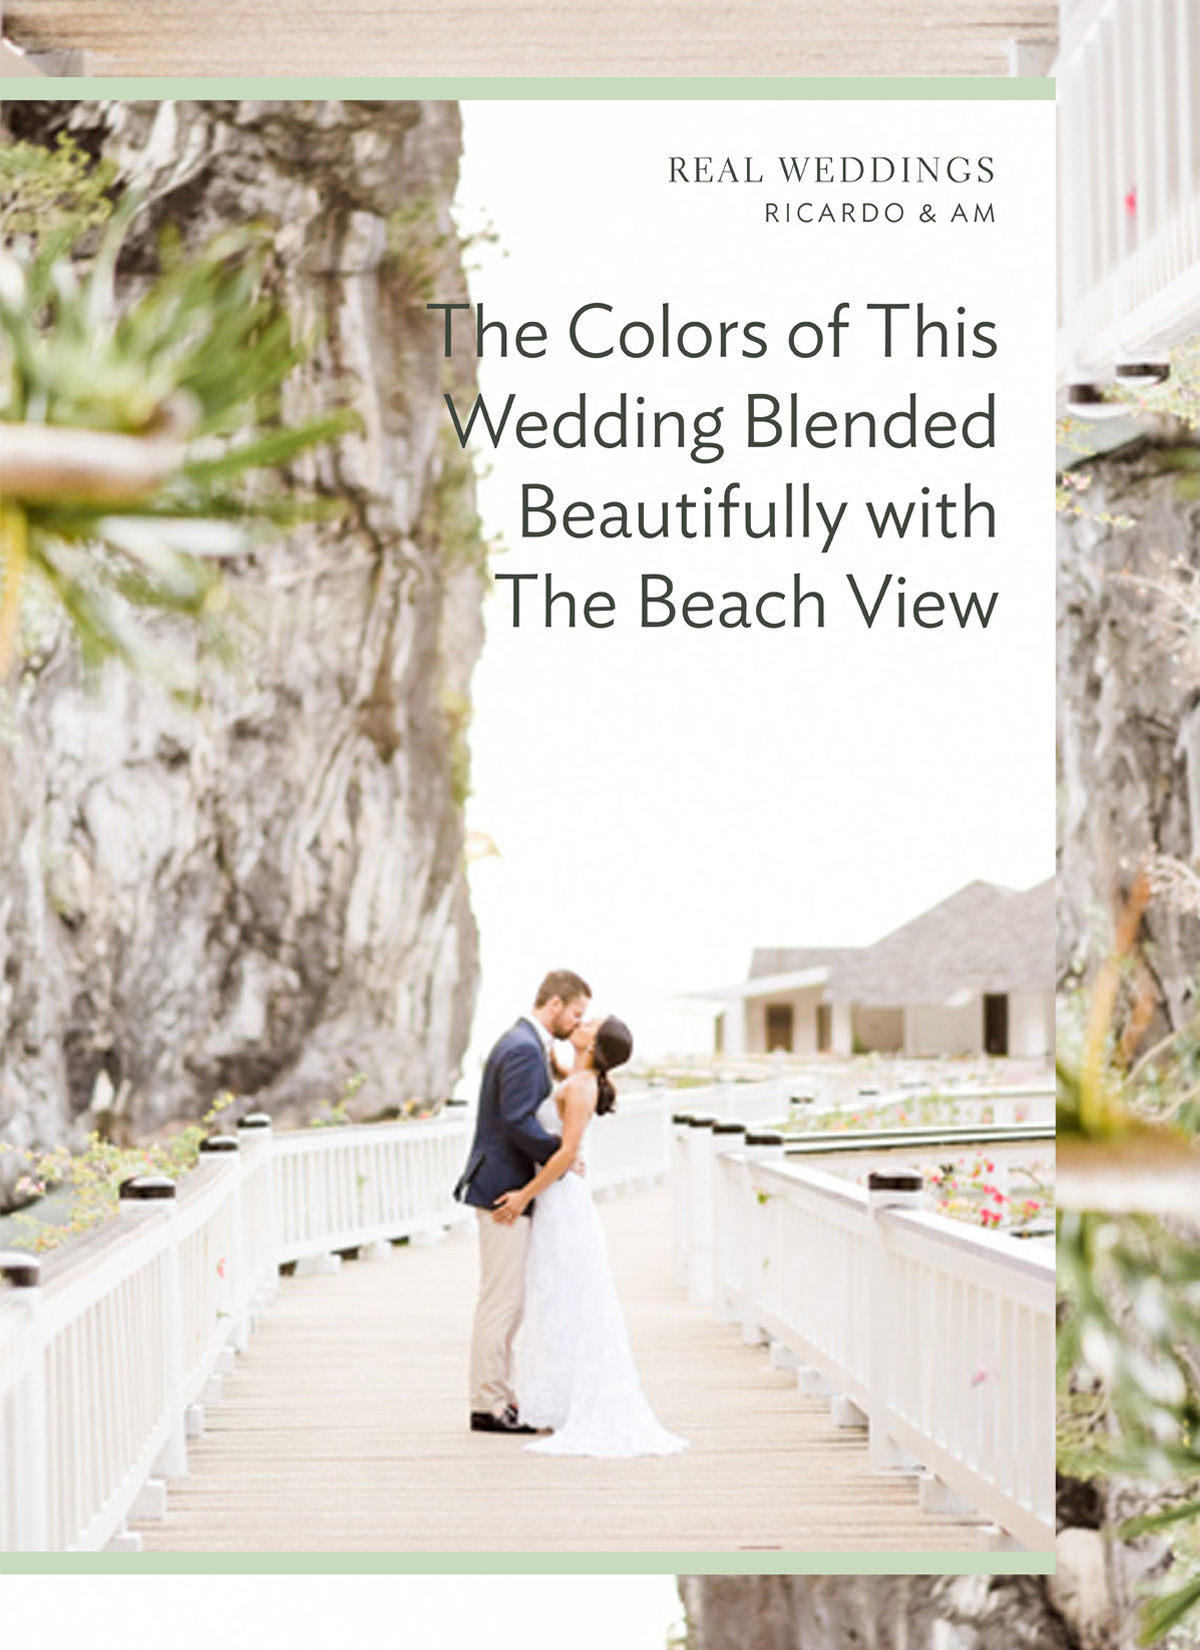 The Colors of This Wedding Blended Beautifully with The Beach View